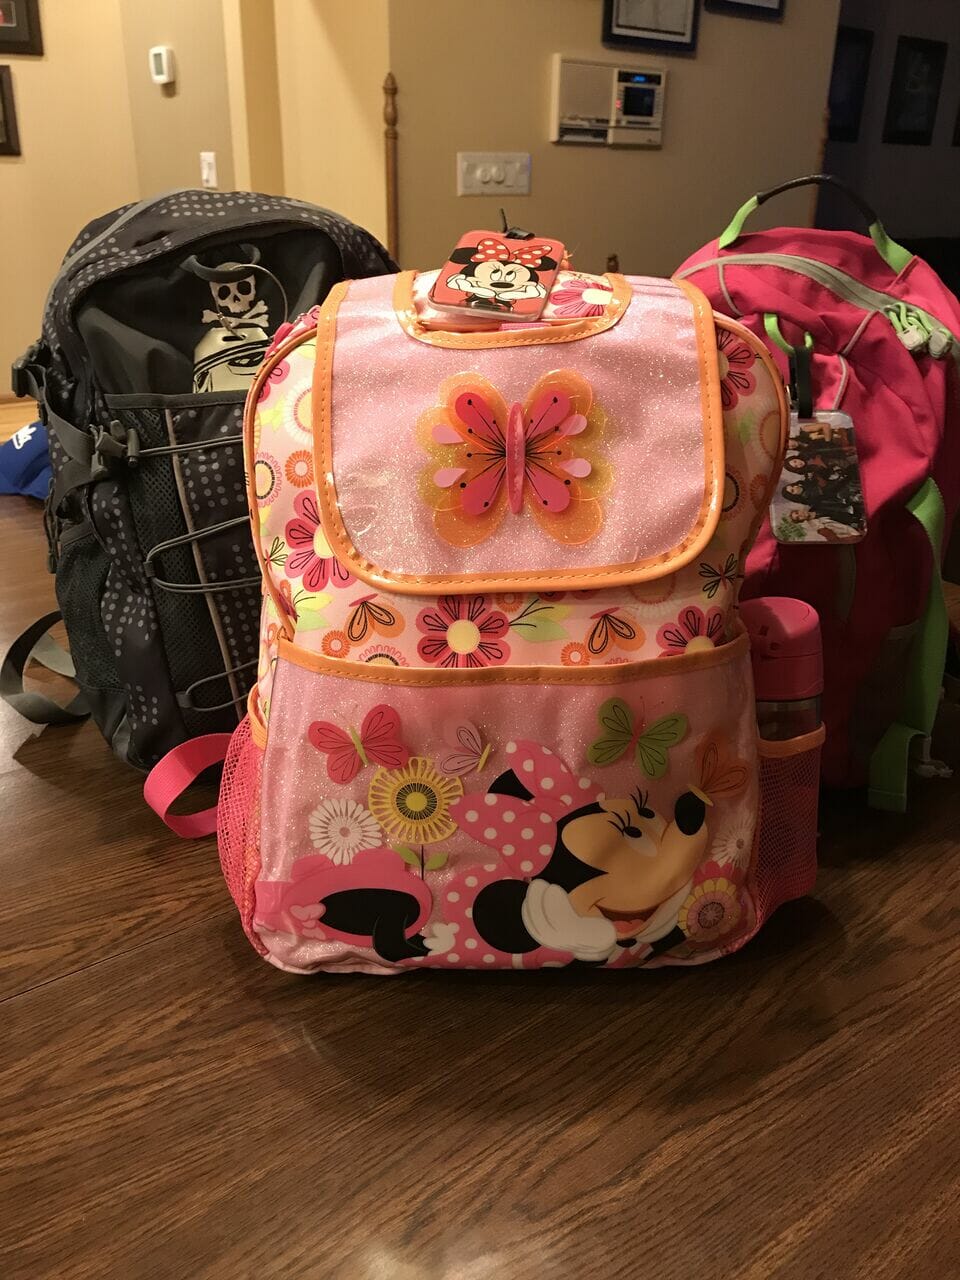 Best Travel Bags for Kids in [currentyear]